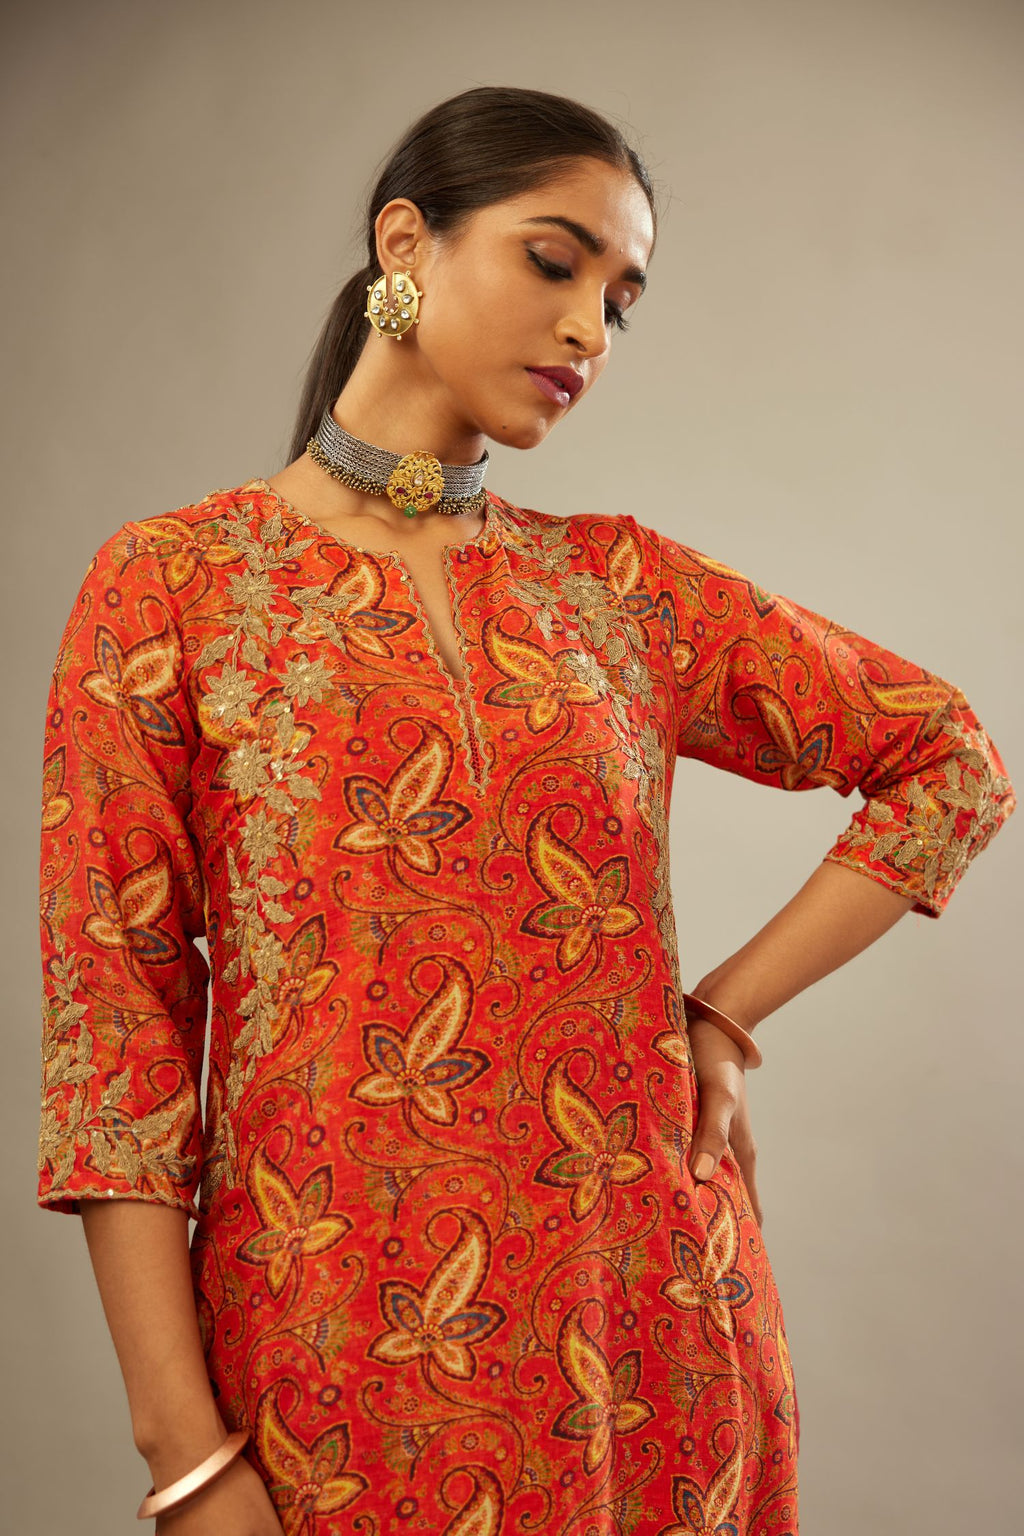 Burnt orange digital printed silk straight kurta set, highlighted with gold dori embroidery, highlighted with gold sequin hand work.